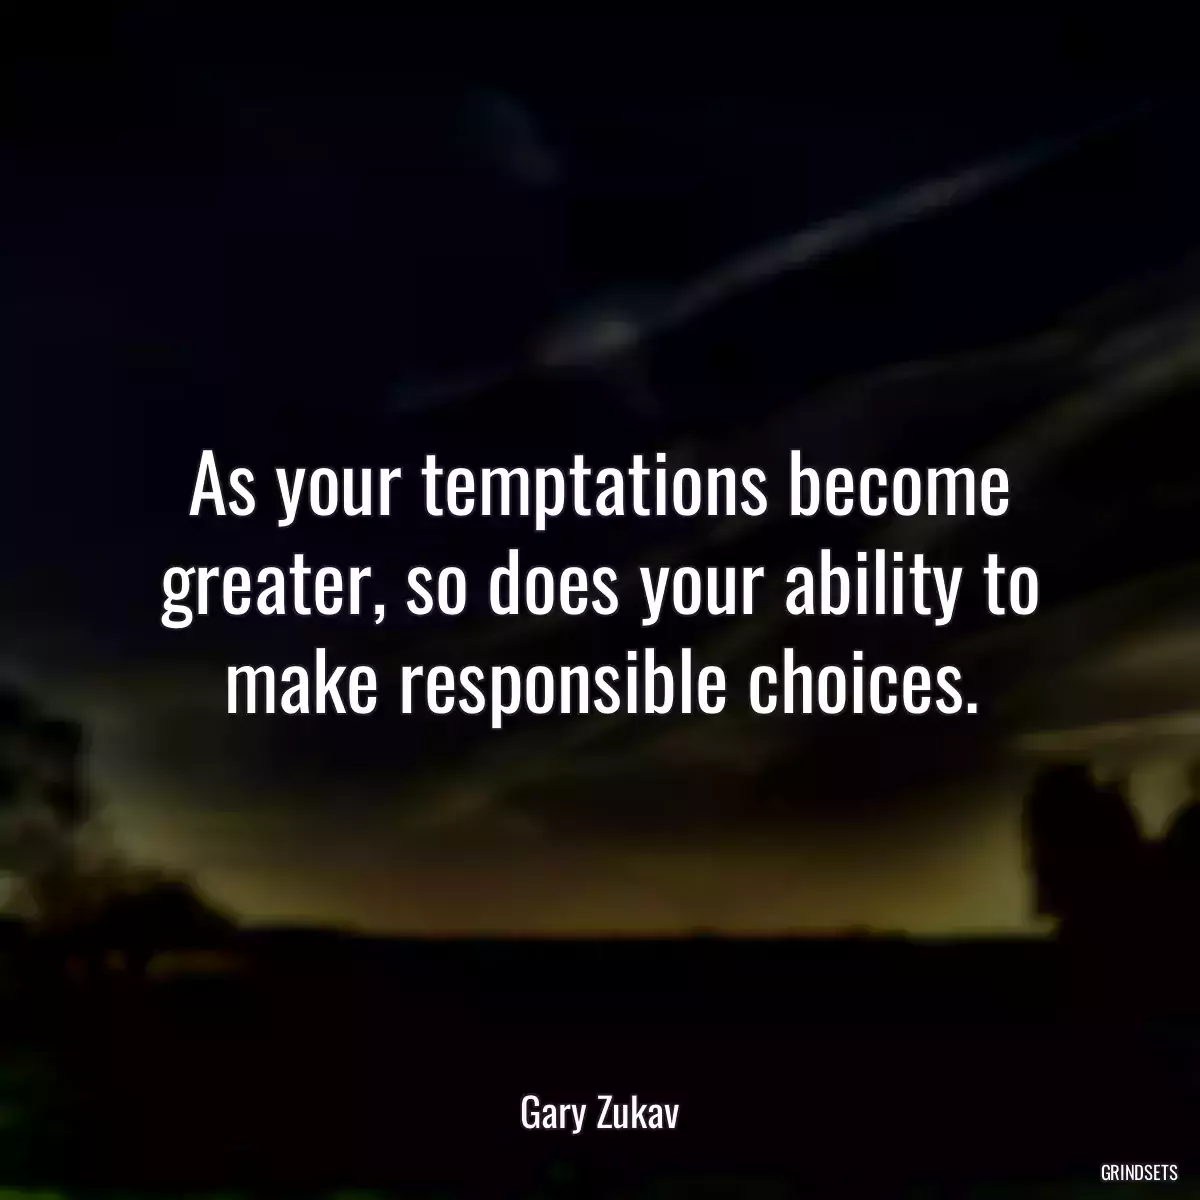 As your temptations become greater, so does your ability to make responsible choices.